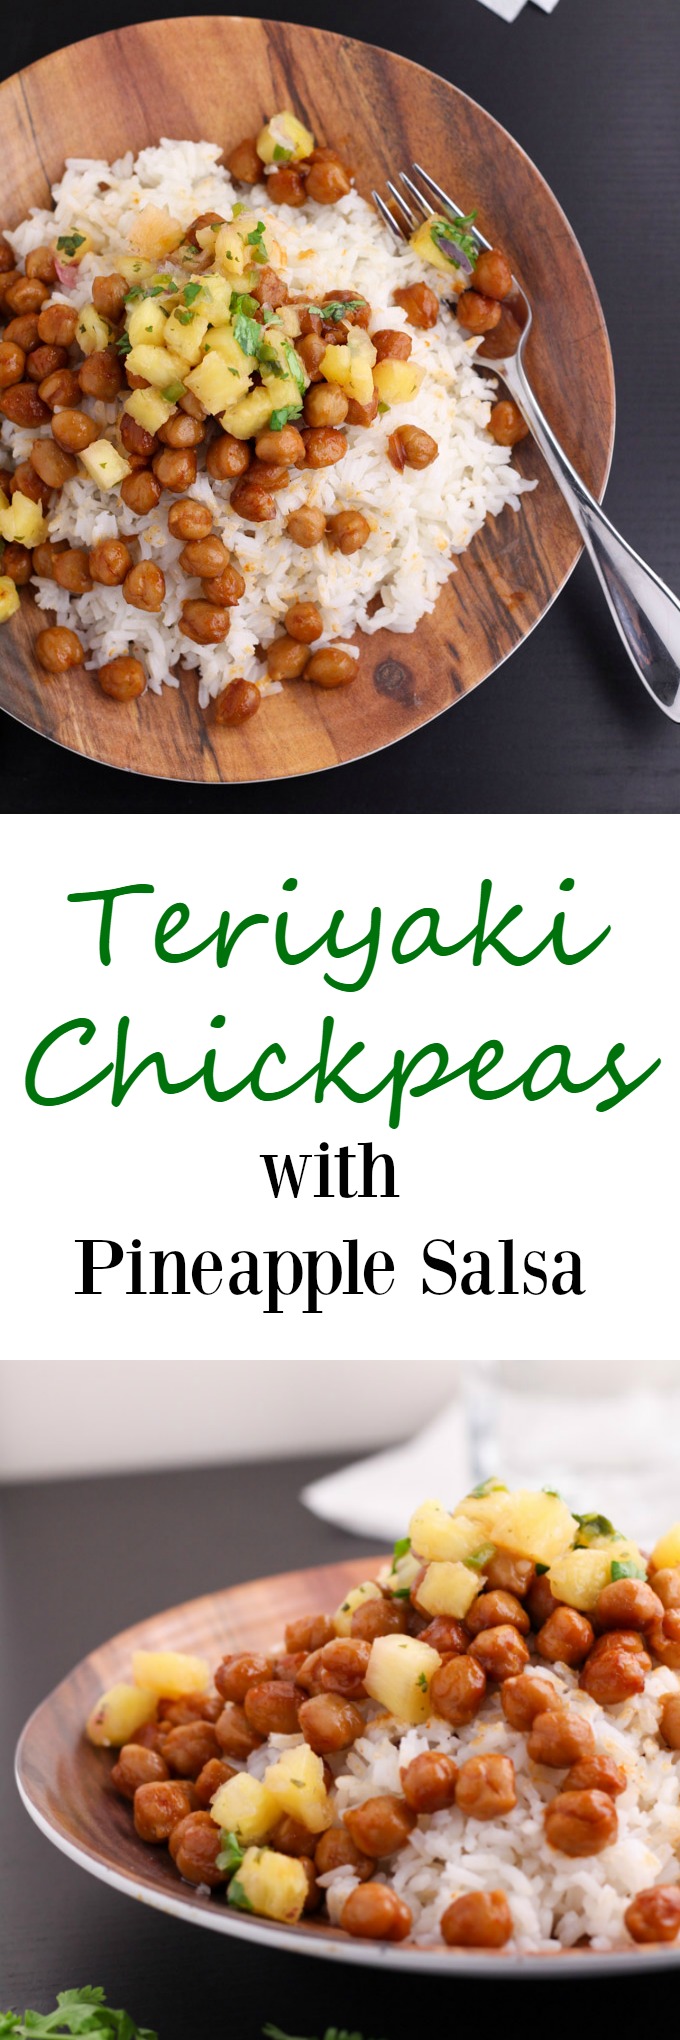 A really simple, delicious, and vegan recipe for teriyaki chickpeas. Serve over rice and top with pineapple salsa. It's a yummy and easy dinner. www.cookingismessy.com